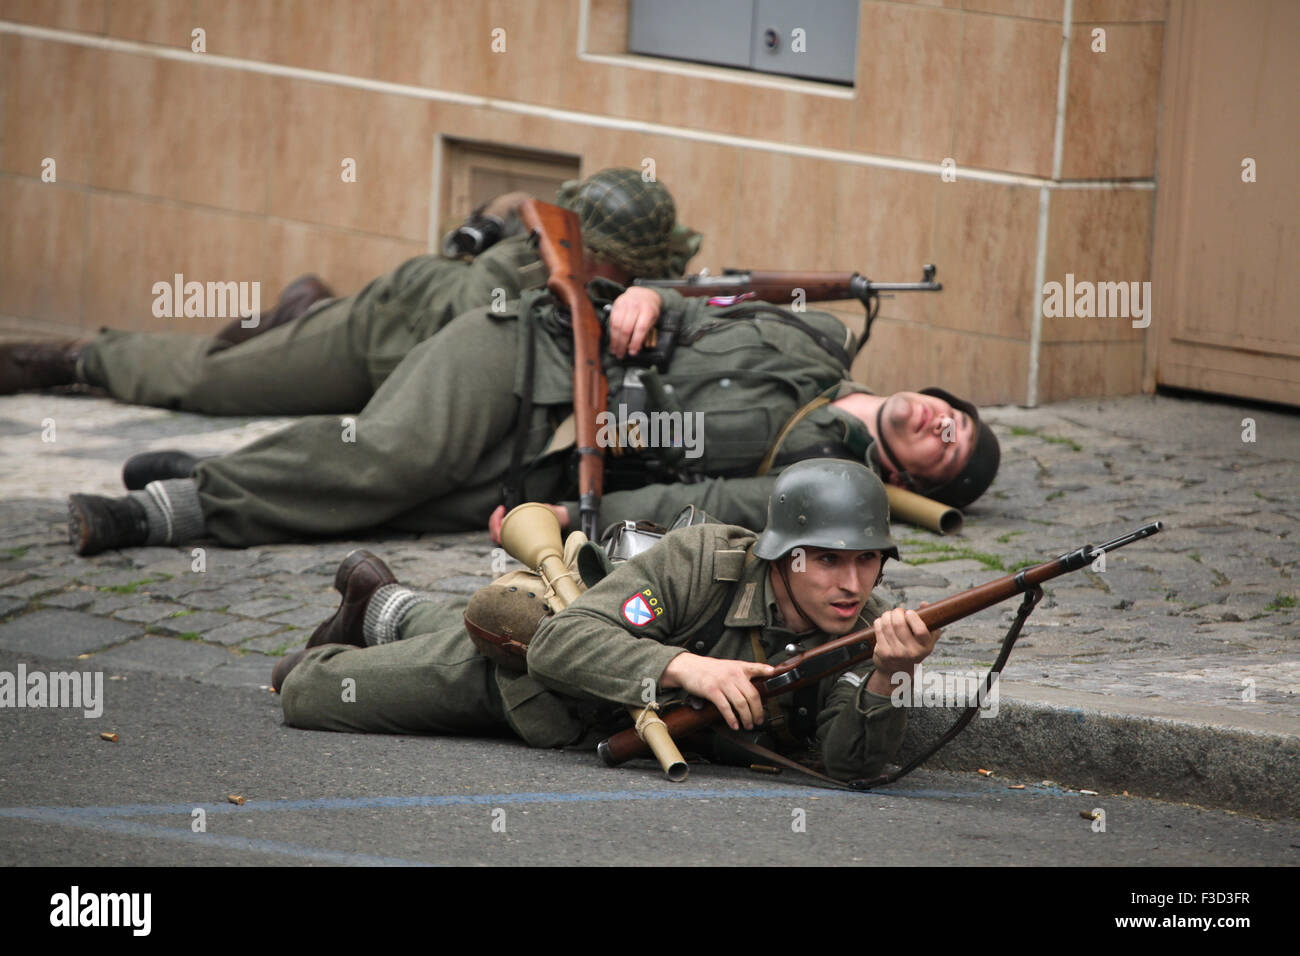 Reenactors uniformed as soldiers of the Russian Liberation Army (ROA) attend the reenactment of the 1945 Prague uprising in Prague, Czech Republic, on May 9, 2015. The Russian Liberation Army also known as the Vlasov Army came to the help of the Czech insurgents to support the Prague uprising against the German occupation which started on May 5, 1945. Stock Photo